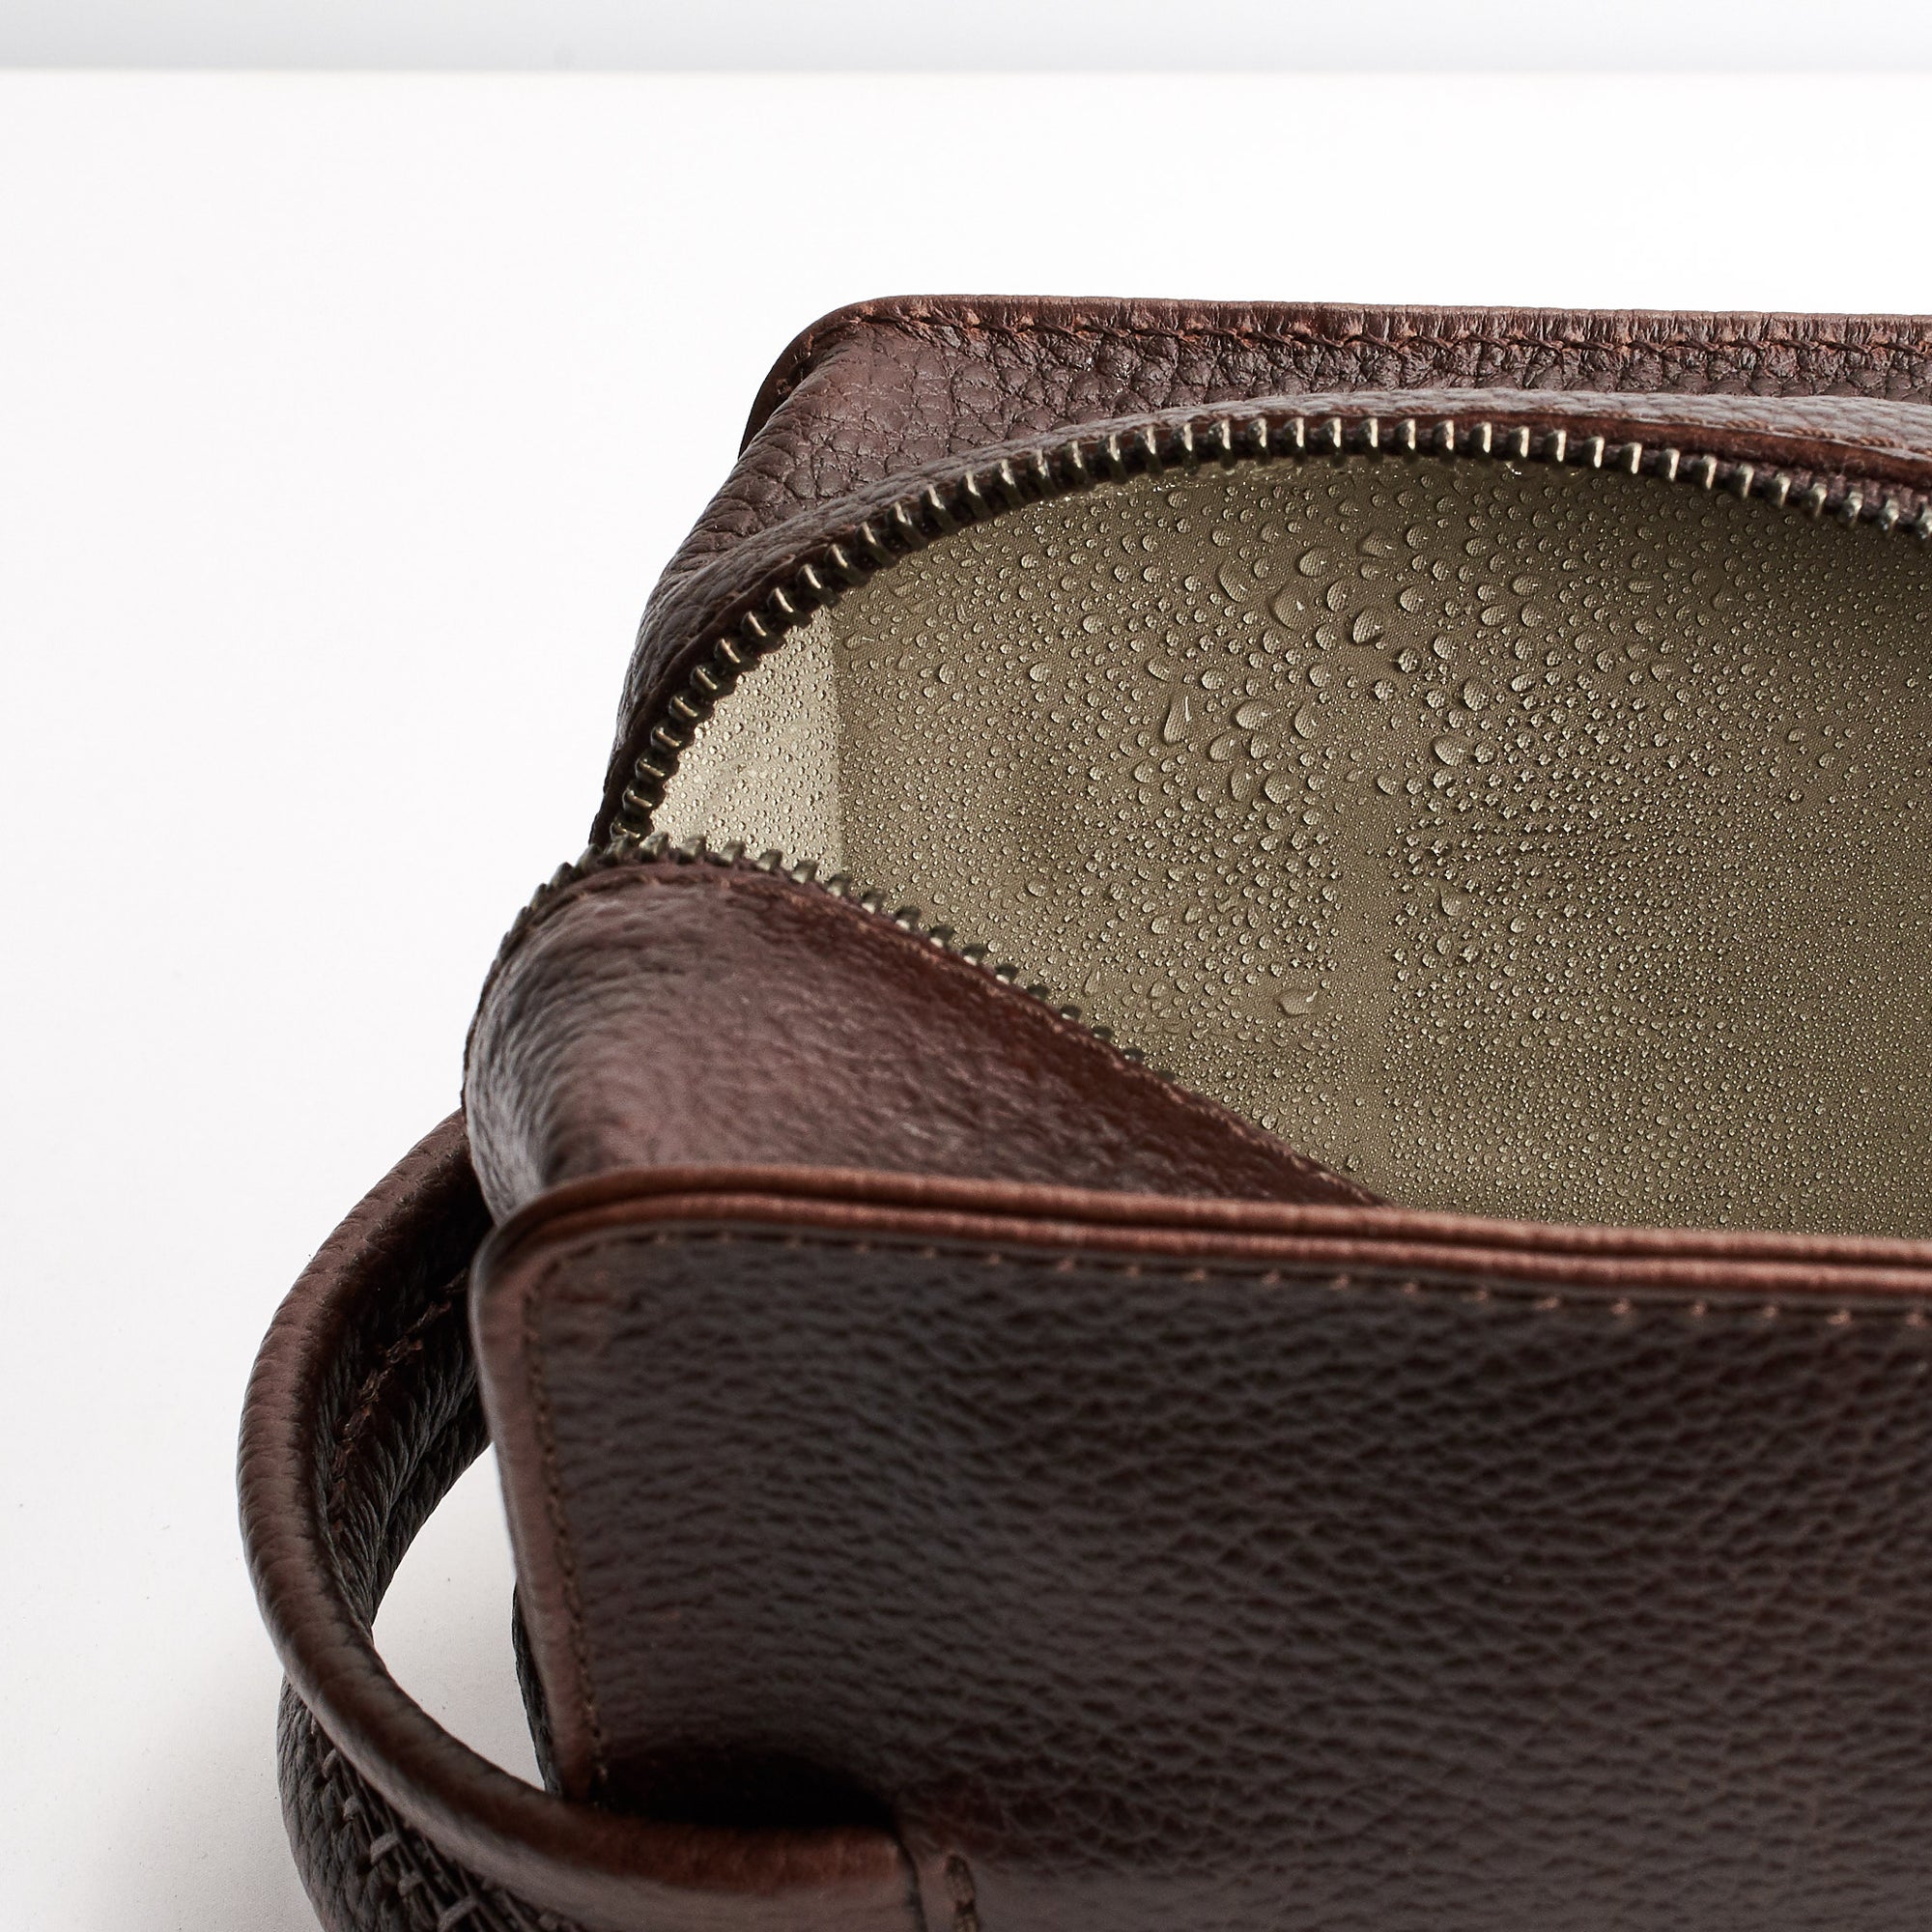 Waterproof interior. Dark Brown leather toiletry, shaving bag with hand stitched handle. Groomsmen gifts